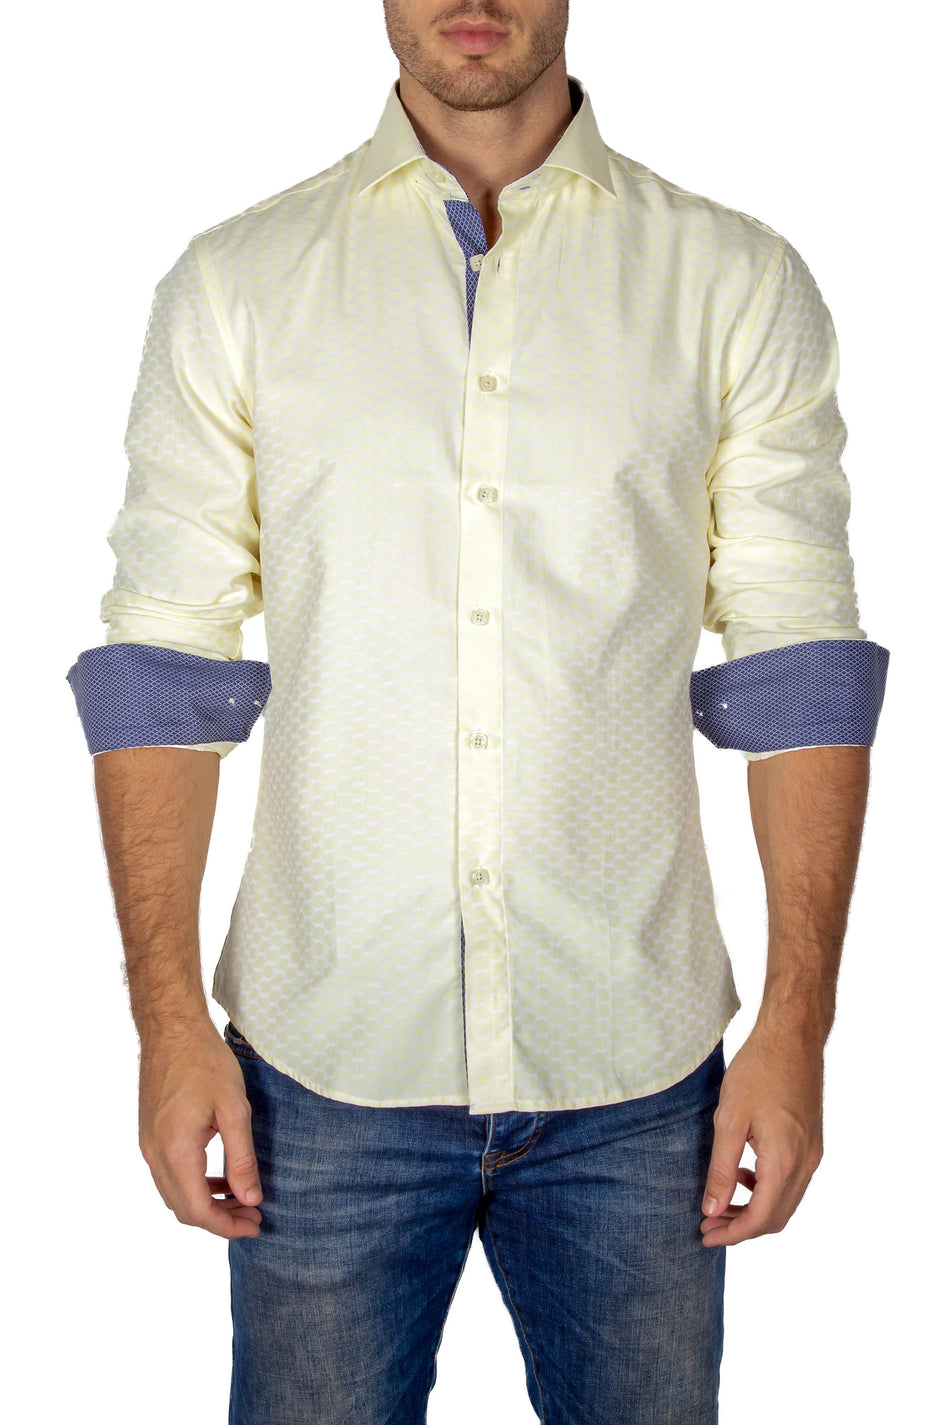 Men's Yellow Long Sleeve Button Up